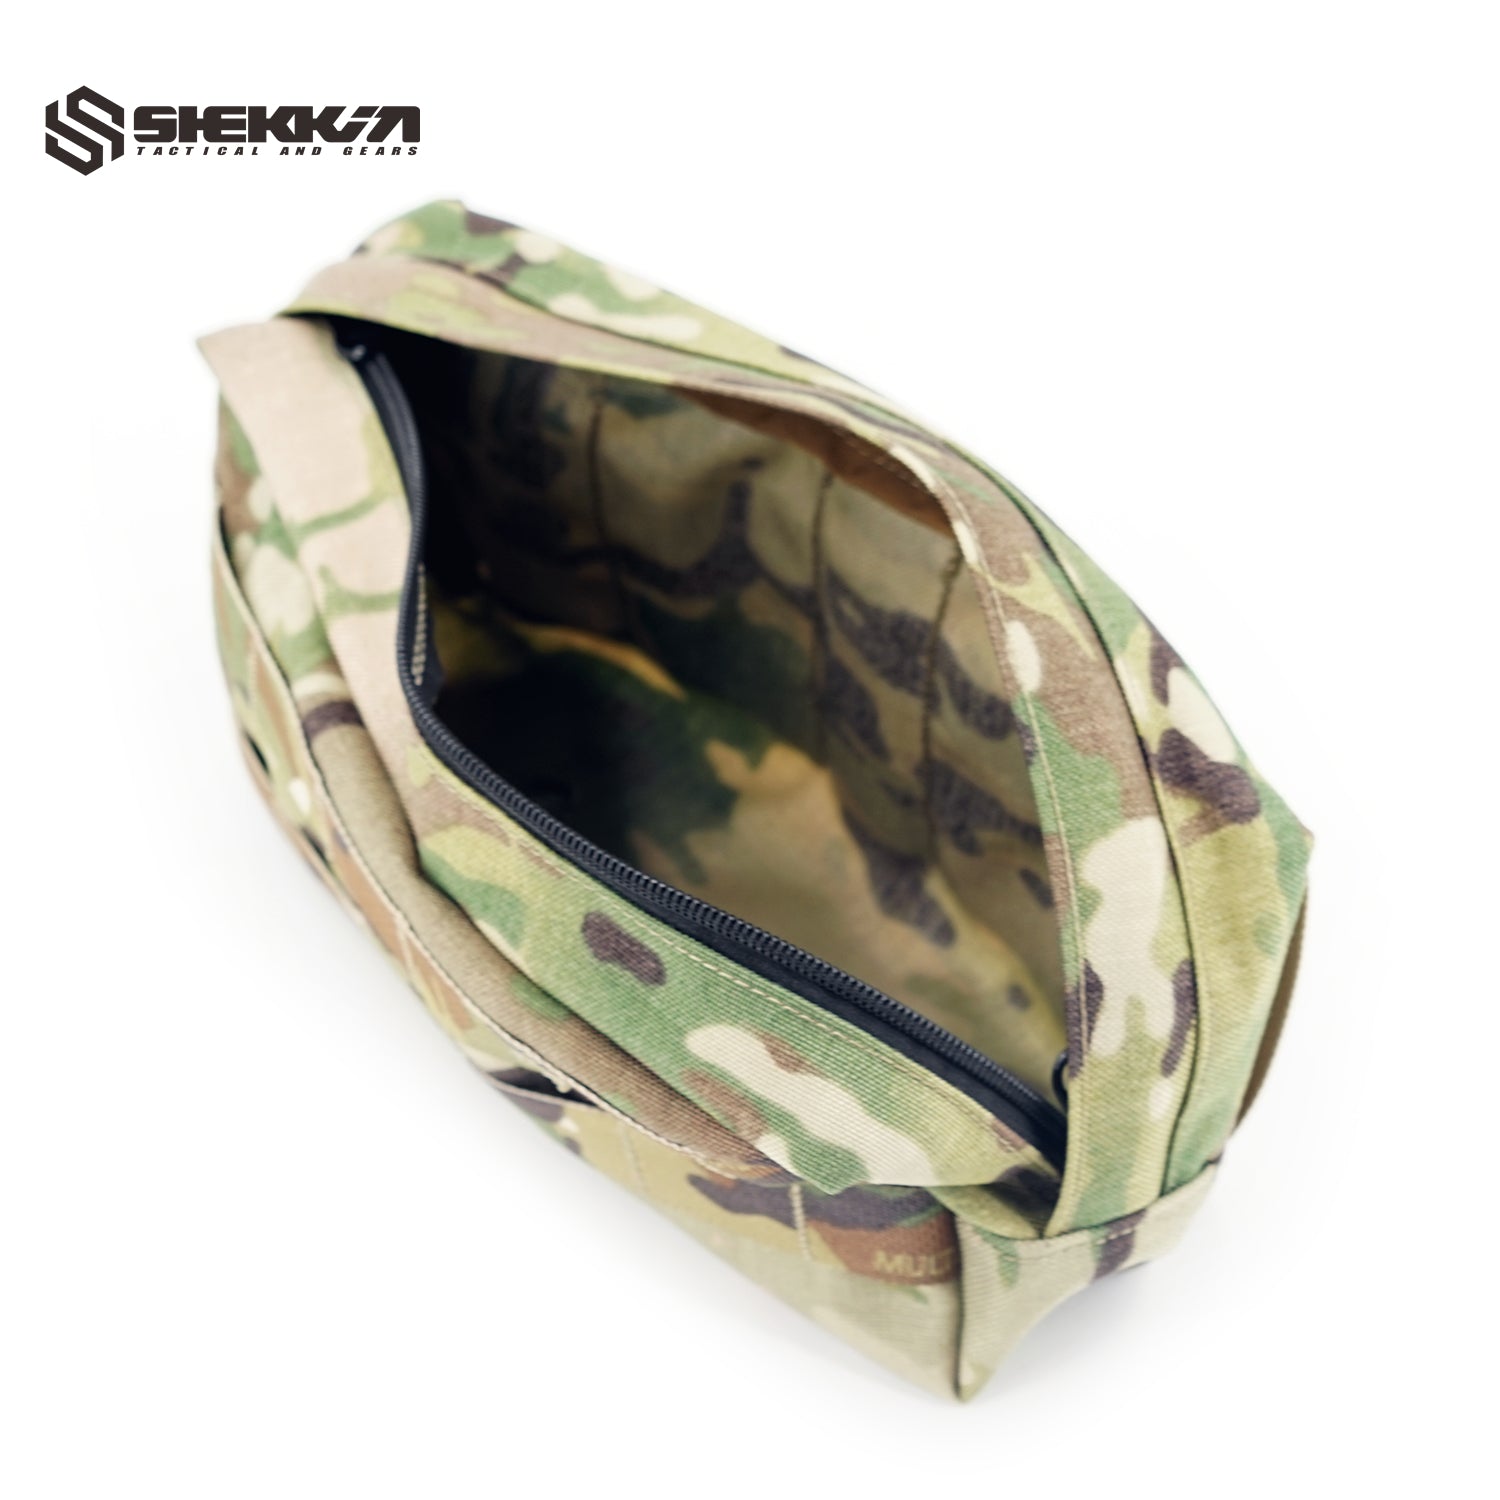 Paraclete style Multicam Horizontal Utility Pouch - Shekkin Gears